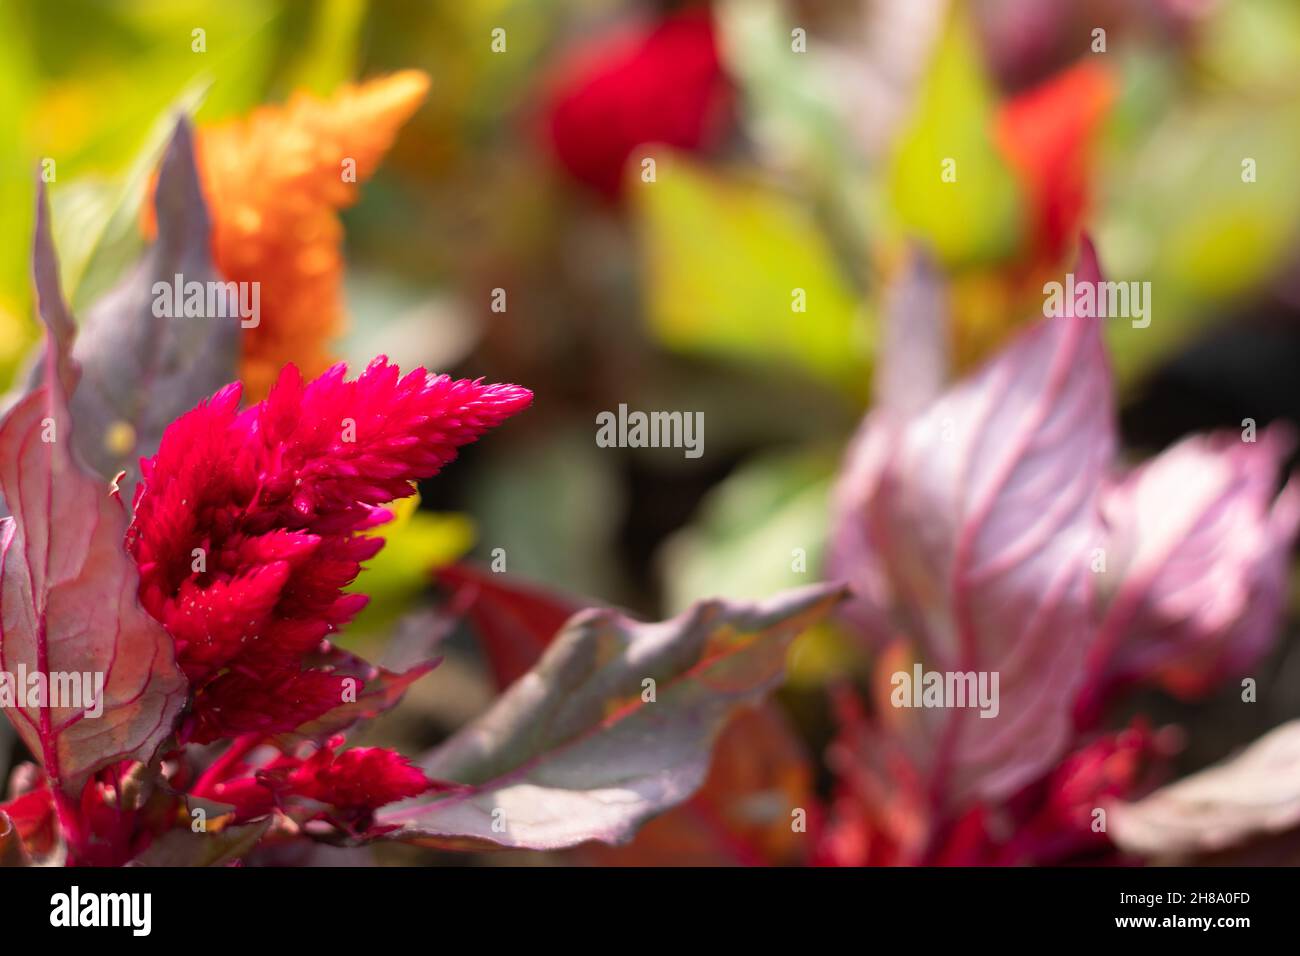 Selective Focus On Plumed Red Argentea Celosia Plumosa Flower Also Known As Chinese Wool, Amaranthus, Amarnath Wool, Indian Murga Phool On Colorful Fl Stock Photo